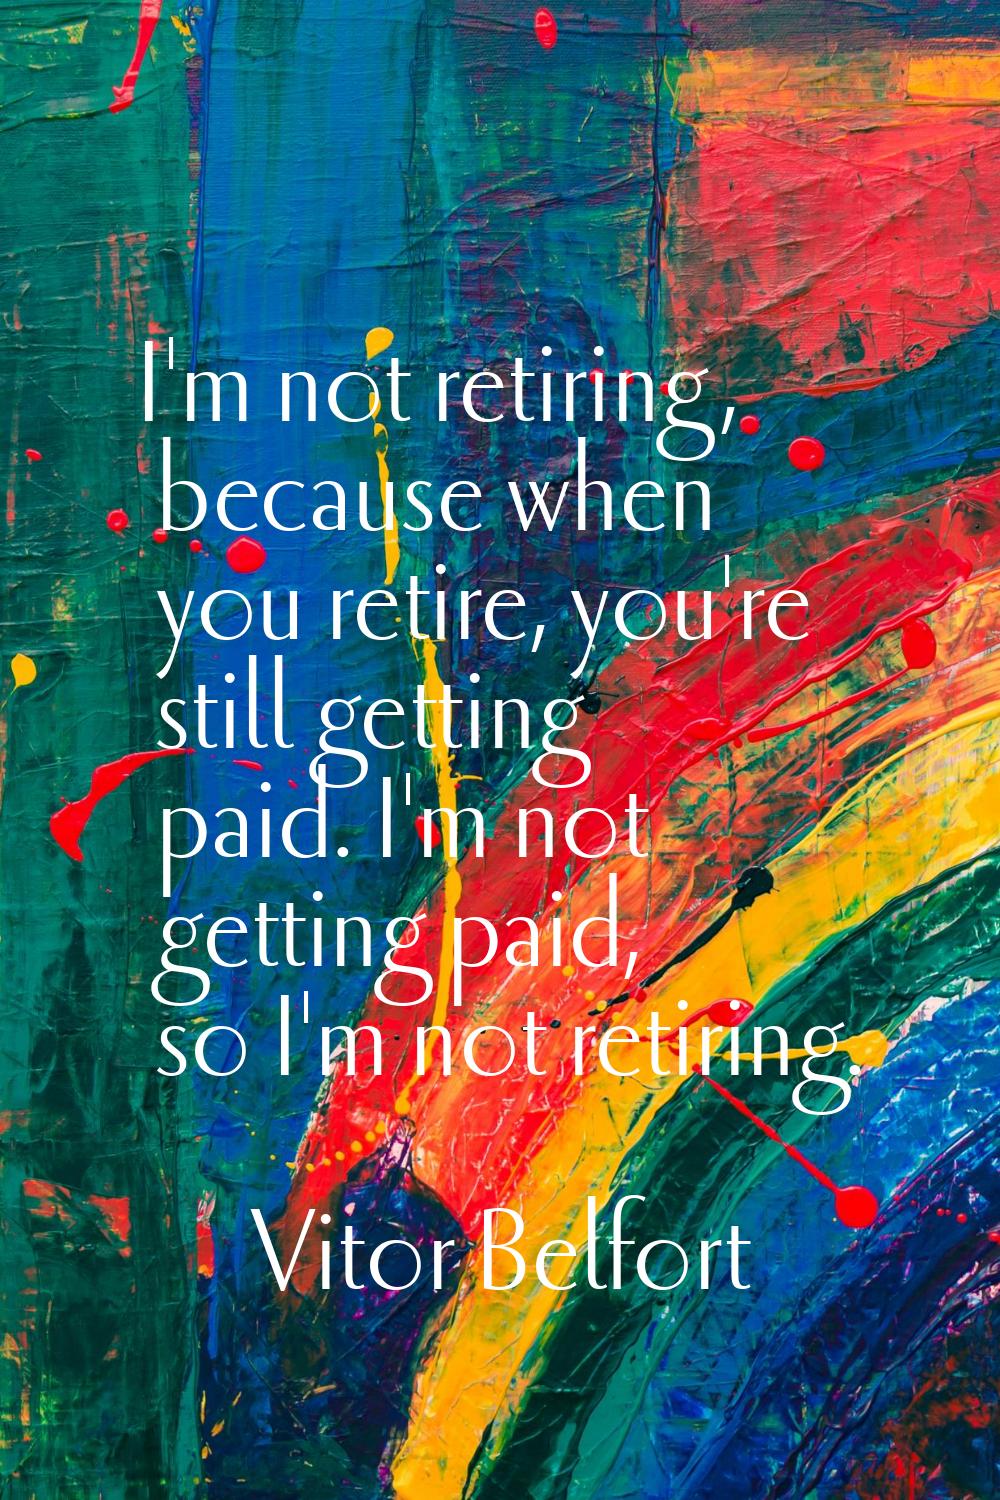 I'm not retiring, because when you retire, you're still getting paid. I'm not getting paid, so I'm 